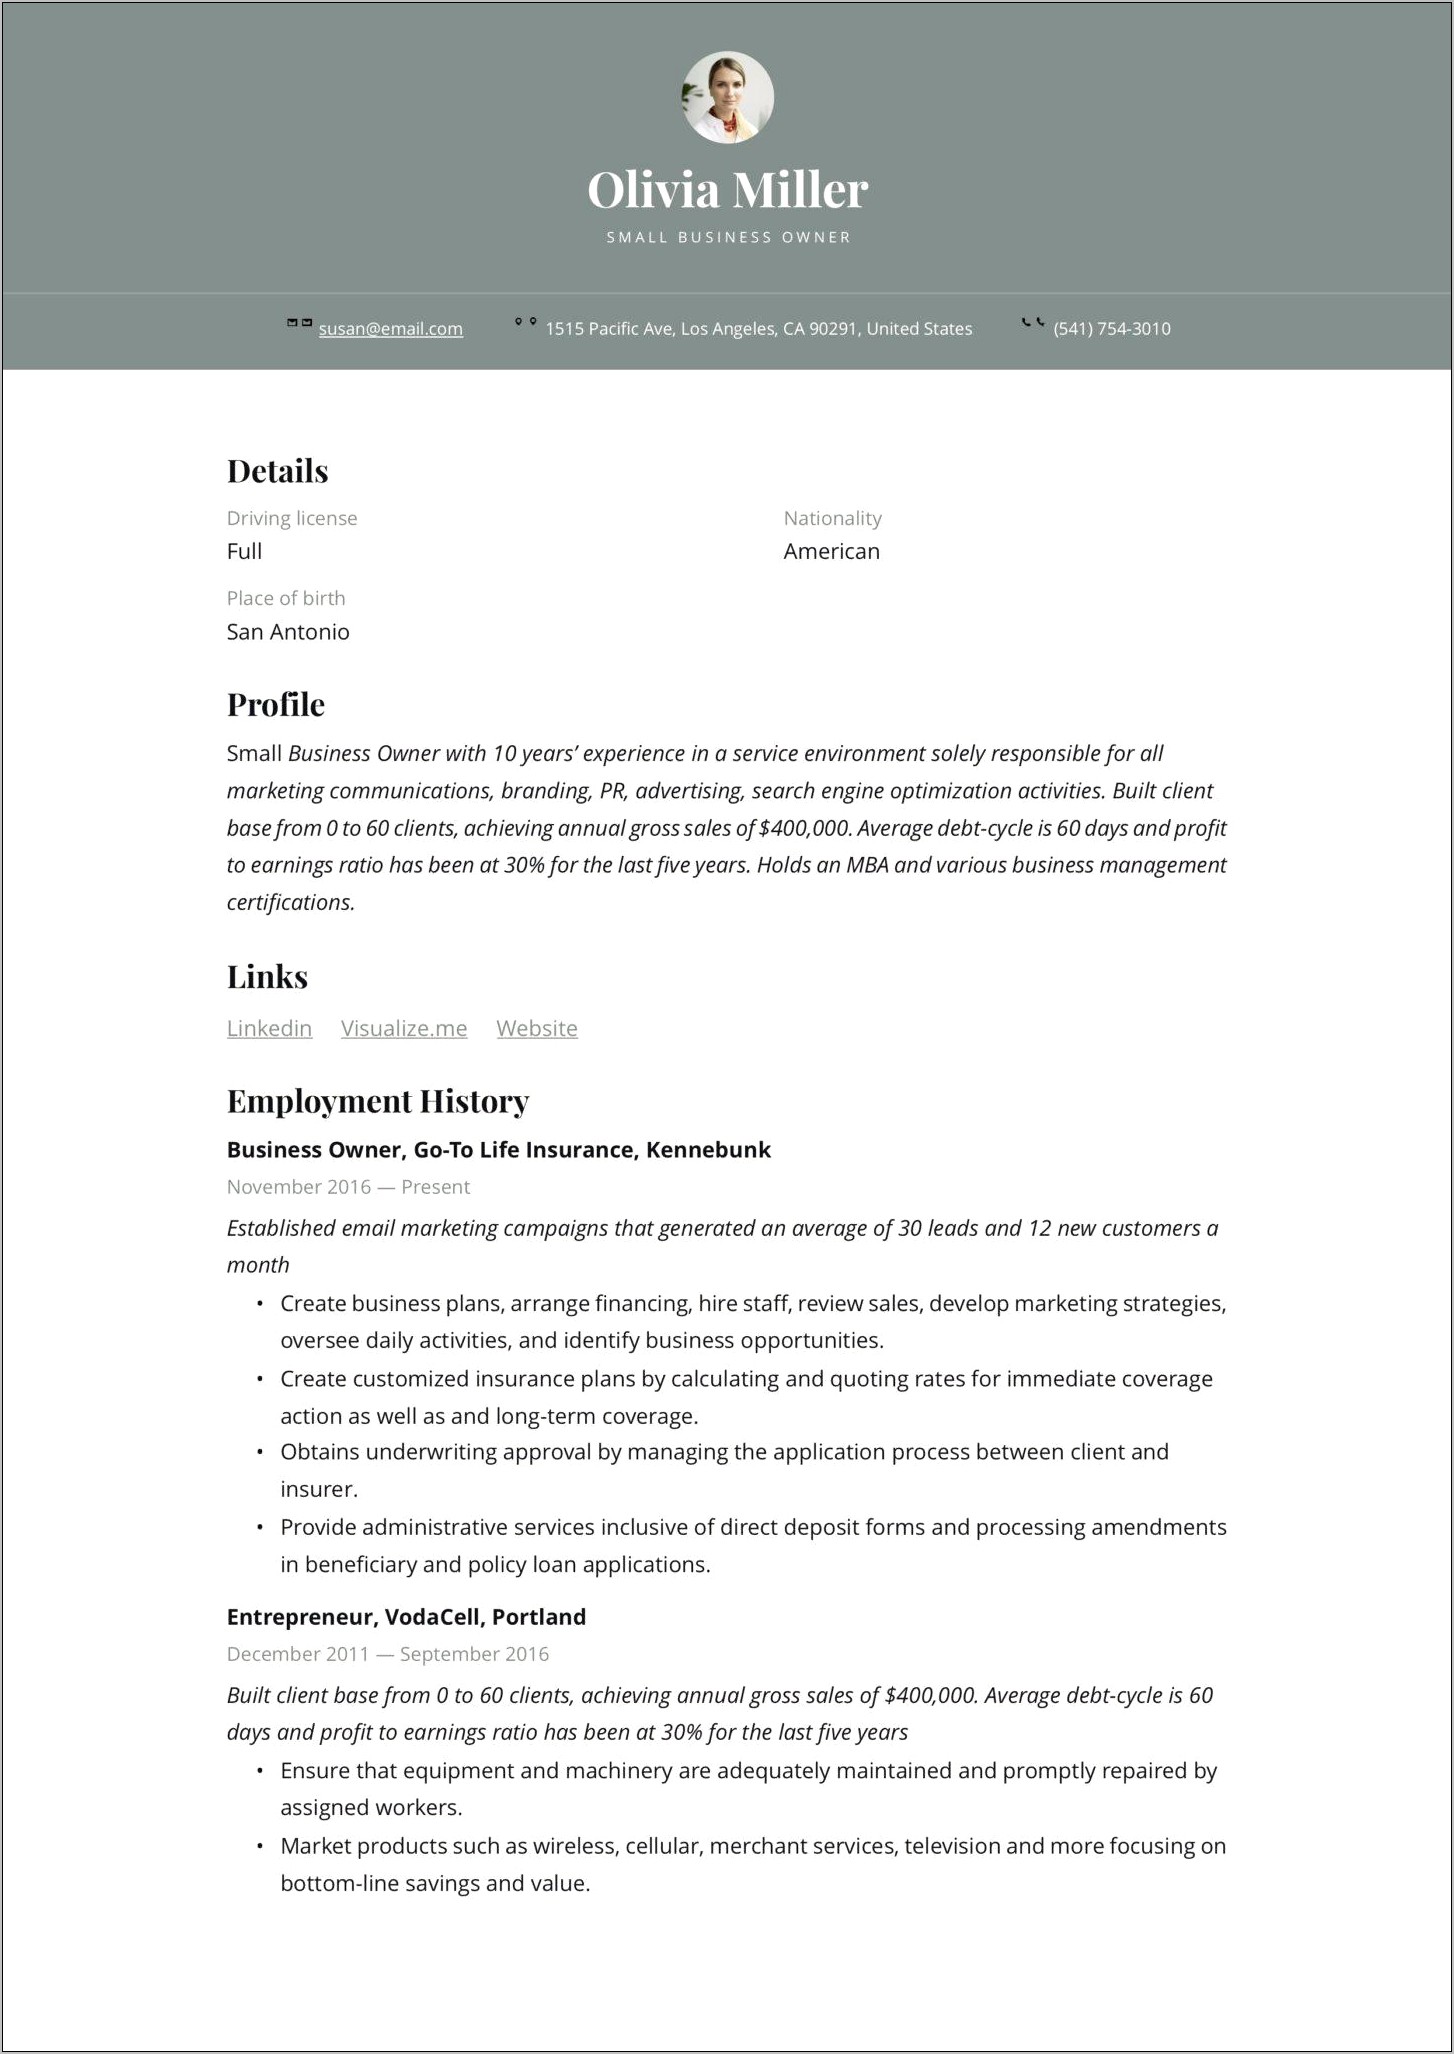 Skills For A Business Owner On Resume